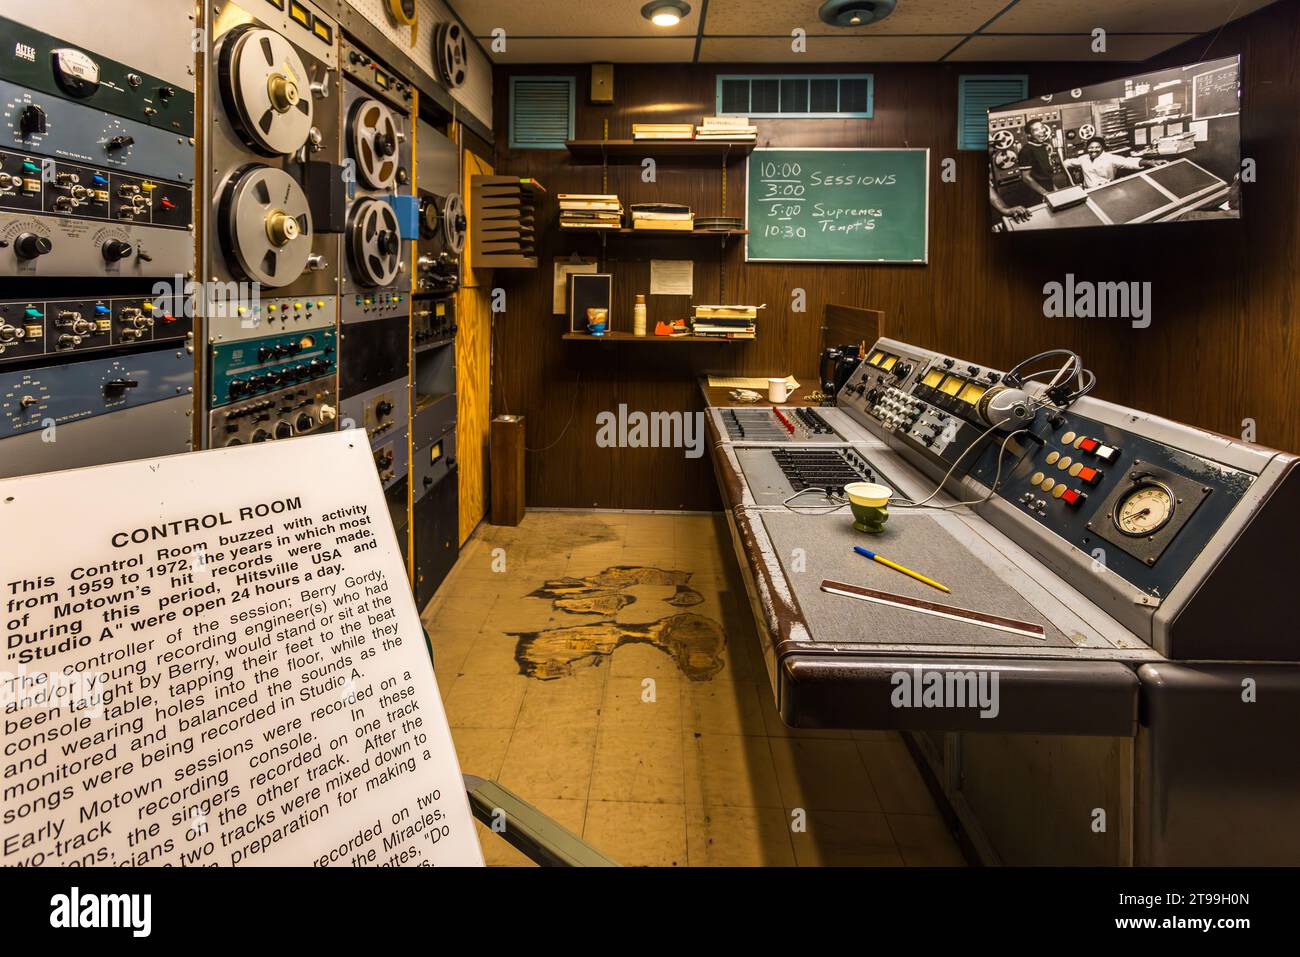 Motwown Music control room. Between 1961 and 1971, Motown released 110 hits in the US Top 10, a new hit almost every month on average. Among the artists who recorded for Motown were Diana Ross & The Supremes, The Temptations, The Jackson 5, Marvin Gaye and Stevie Wonder. Many famous songs were recorded in this studio between 1959 and 1972. The studio, founded by Berry Gordy, was in operation 24 hours a day. Motown Studios is located in a row of estate houses in Detroit's Boston-Edison Historic District. Detroit, United States Stock Photo